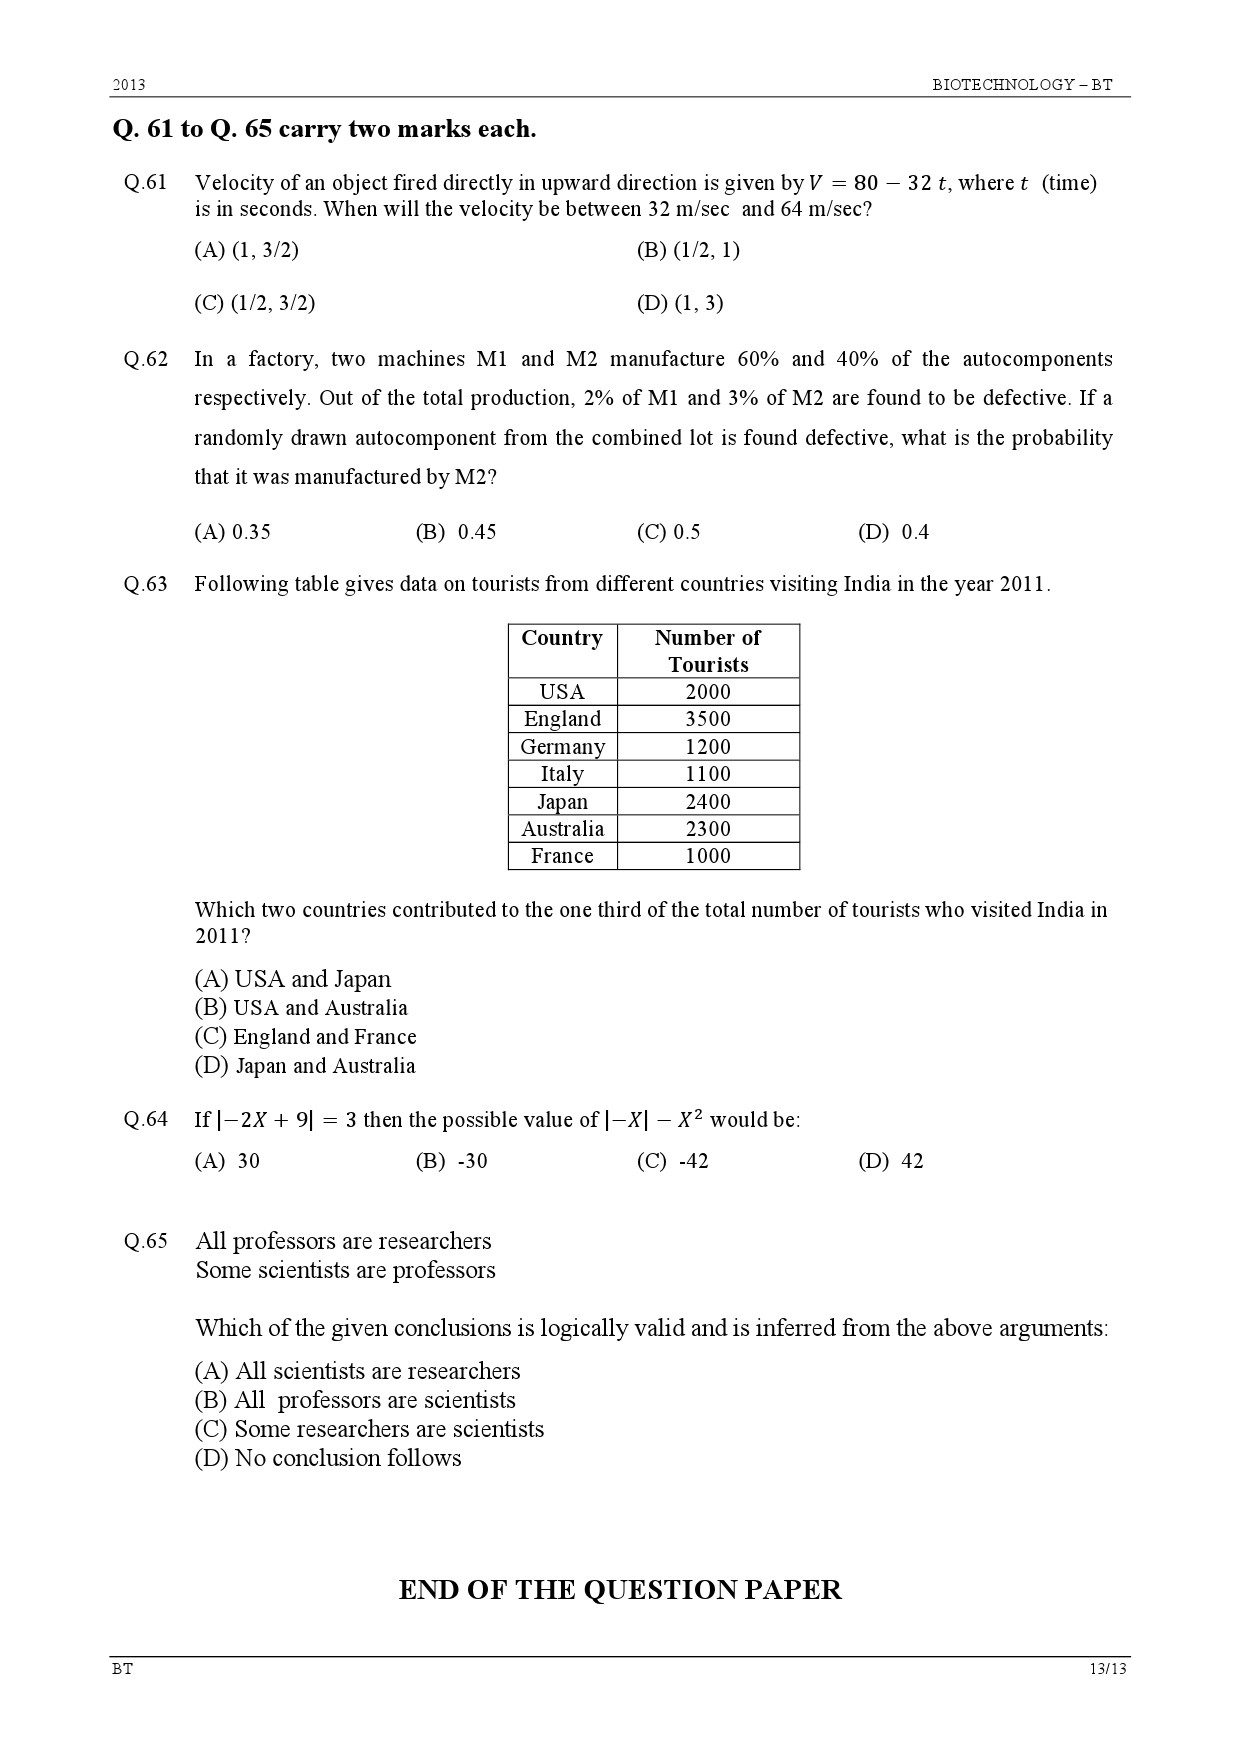 GATE Exam Question Paper 2013 Biotechnology 13